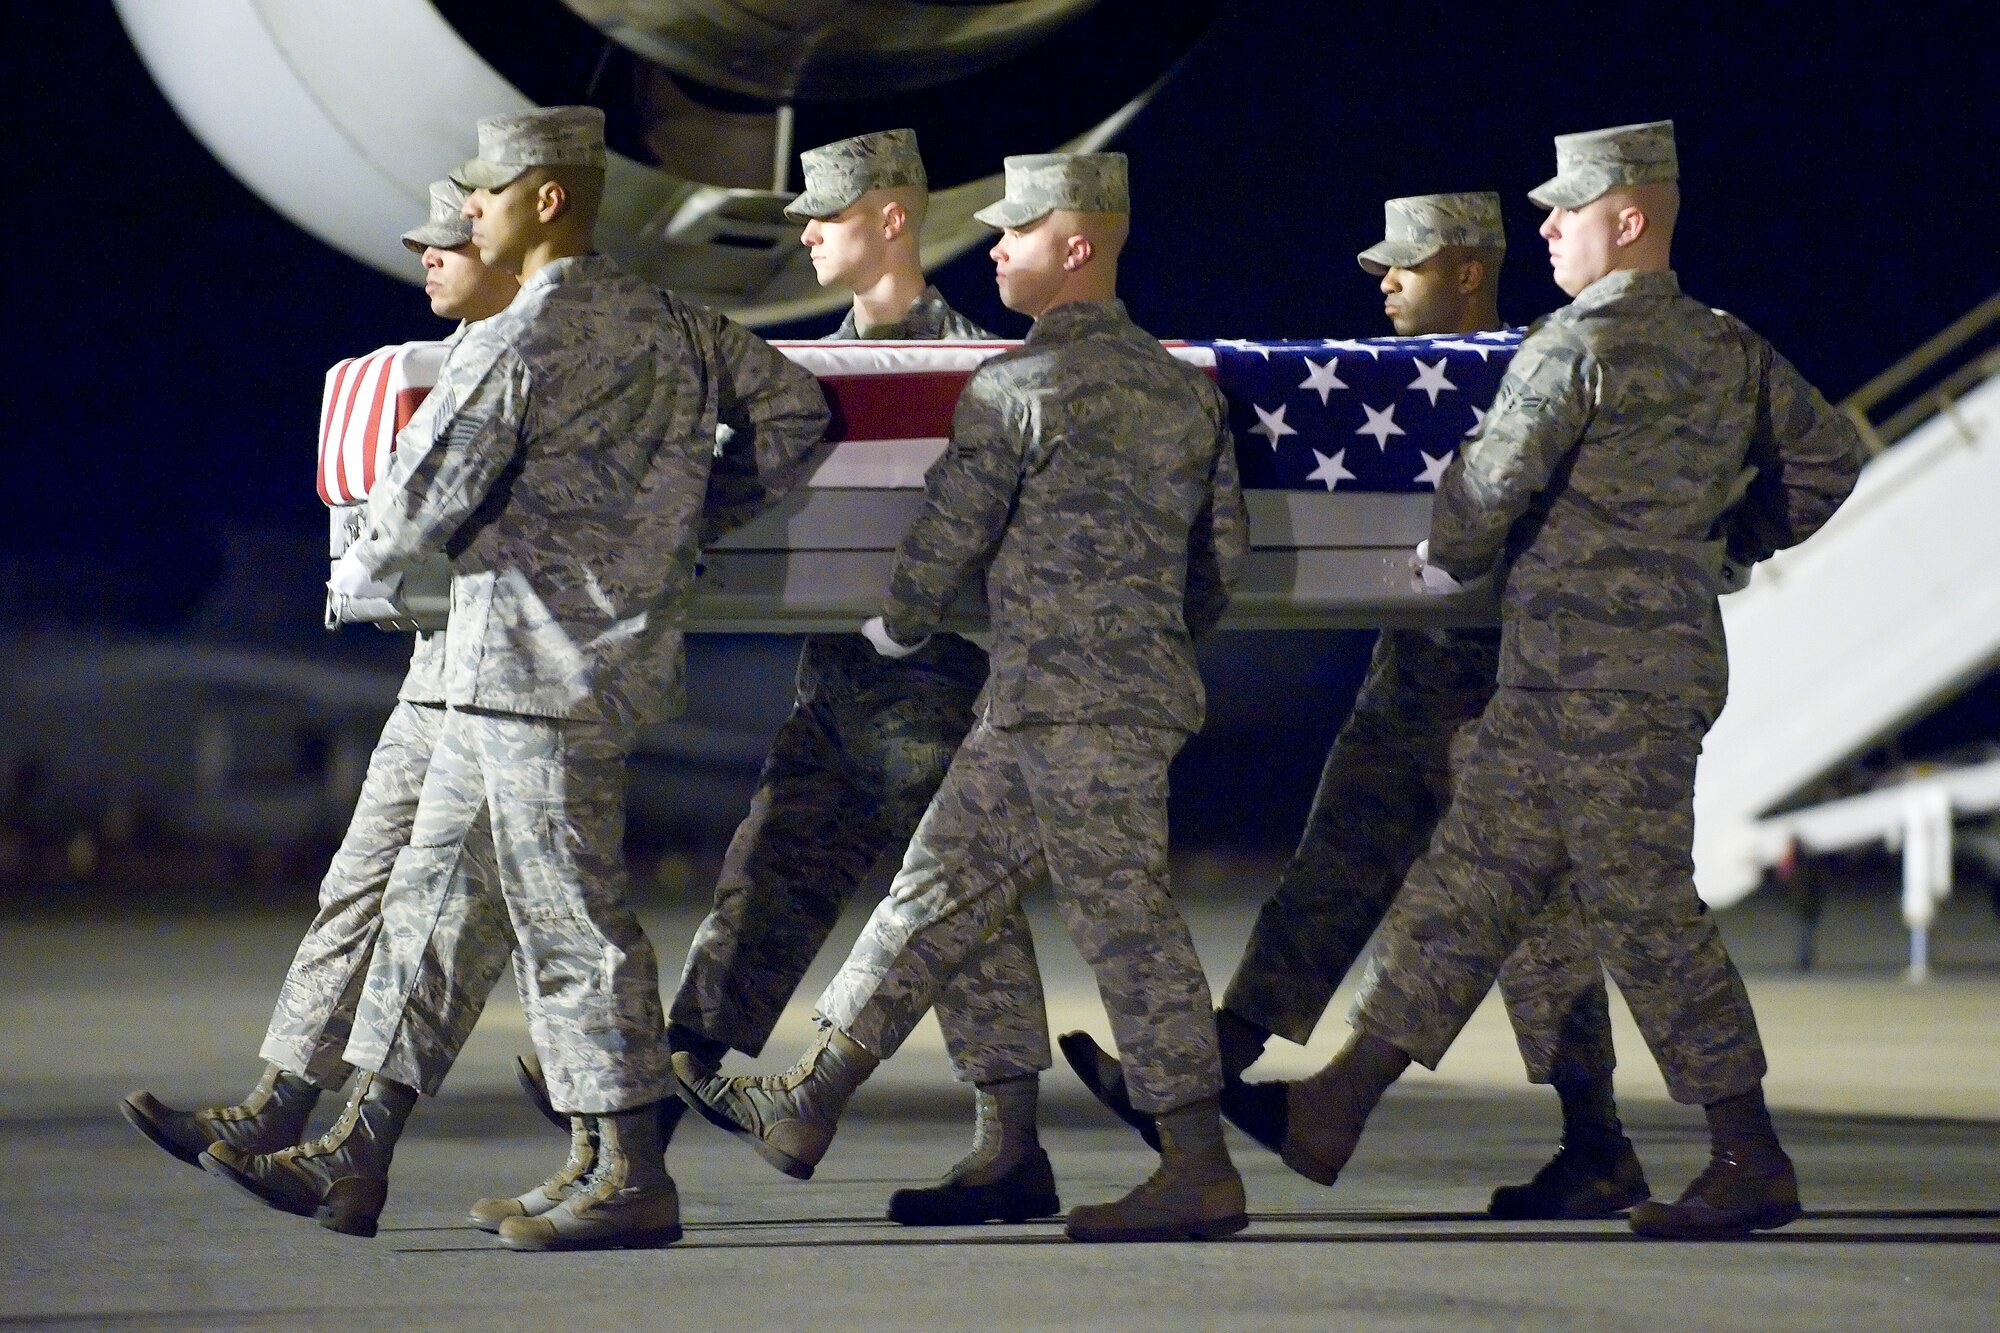 A U.S. Air Force carry team transfers the remains of Air Force Capt. Ryan P. Hall of Colorado Springs, Colo., at Dover Air Force Base, Del., Feb. 21, 2012. Hall was assigned to the 319th Special Operations Squadron, Hurlburt Field, Fla. (U.S. Air Force photo/Adrian R. Rowan)
